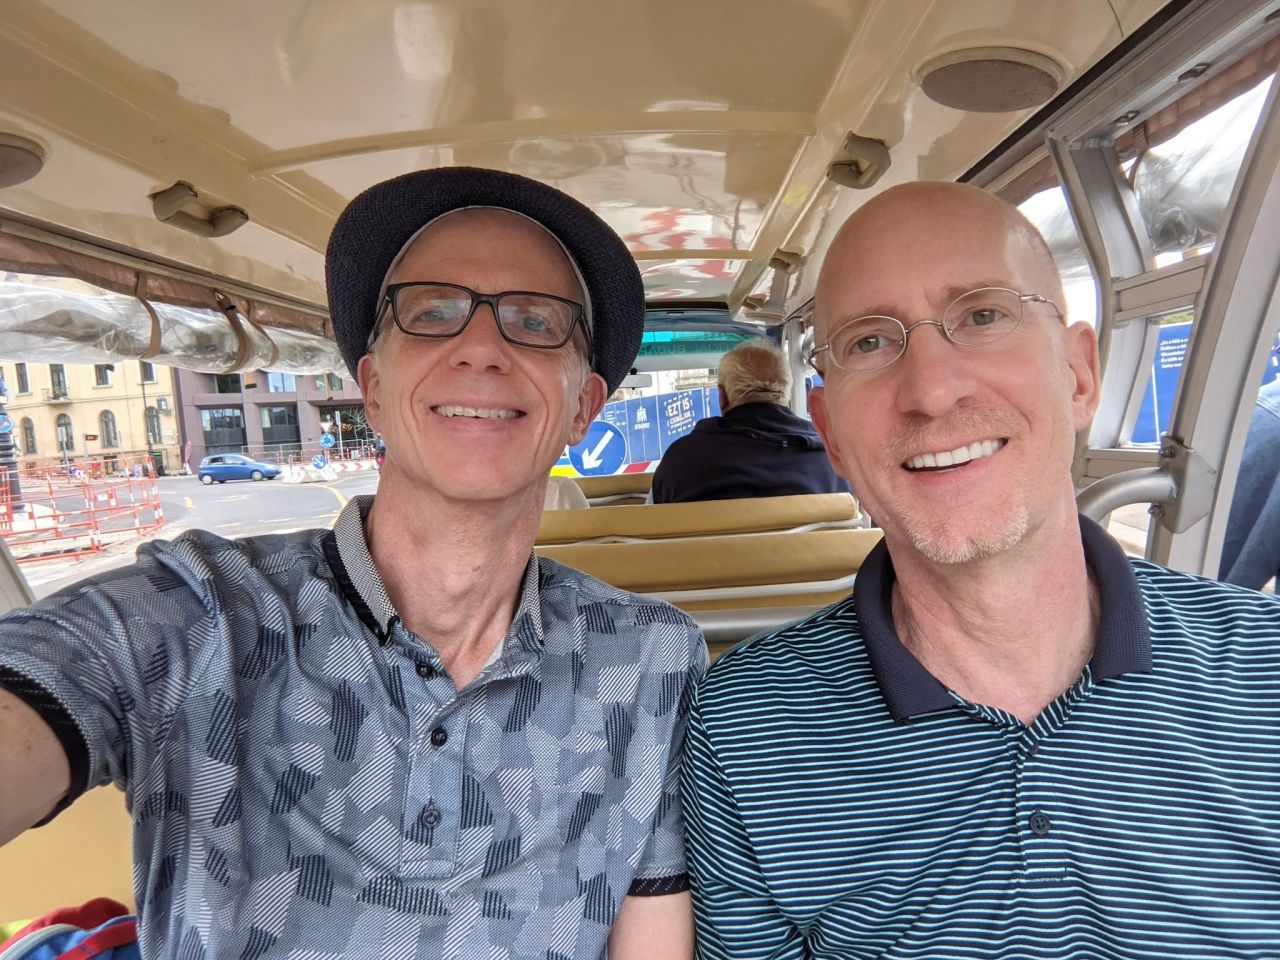 Brent Hartinger and Michael Jensen enjoy the freedom working remotely gives them to explore the globe.